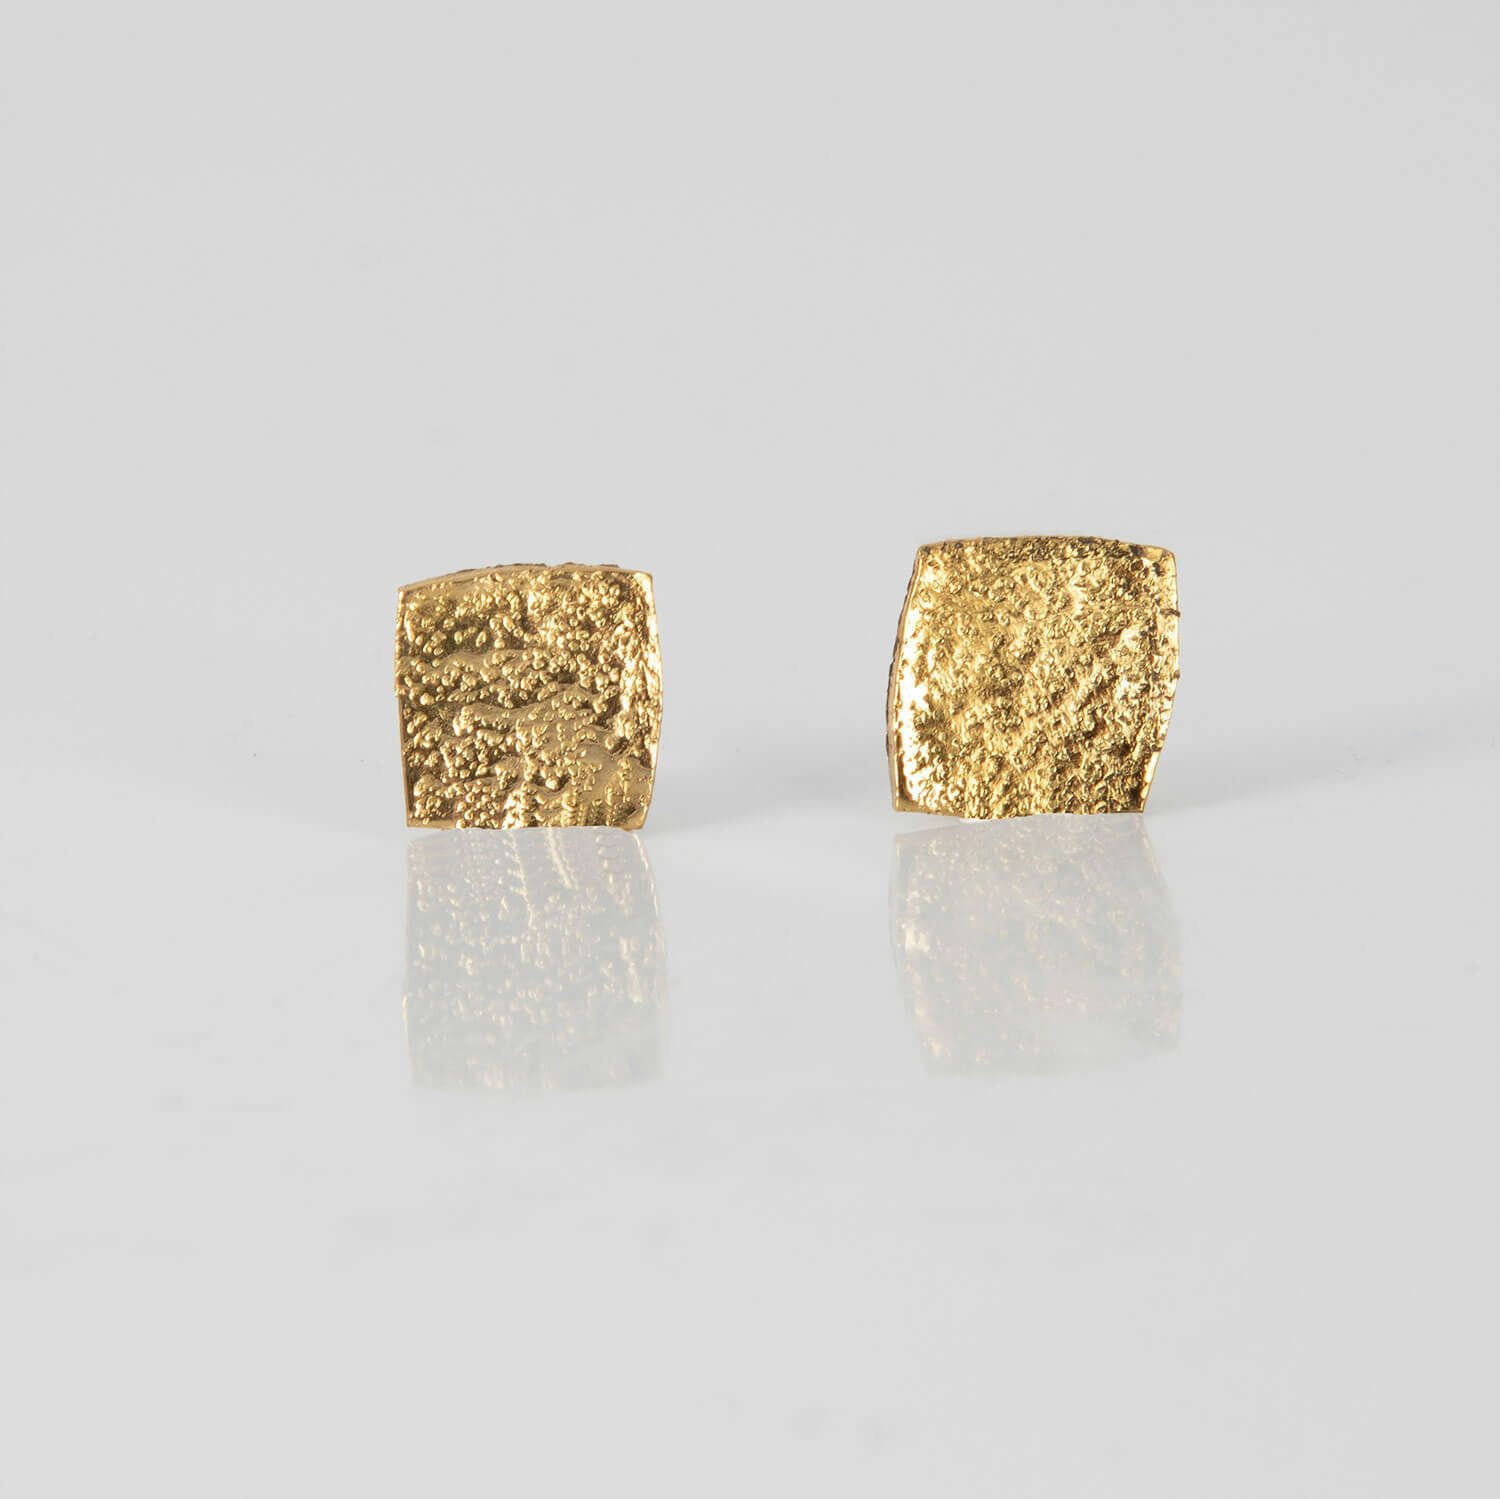 NO LEFT SQUARE, EARRINGS, 24K GOLD PLATED, WEB